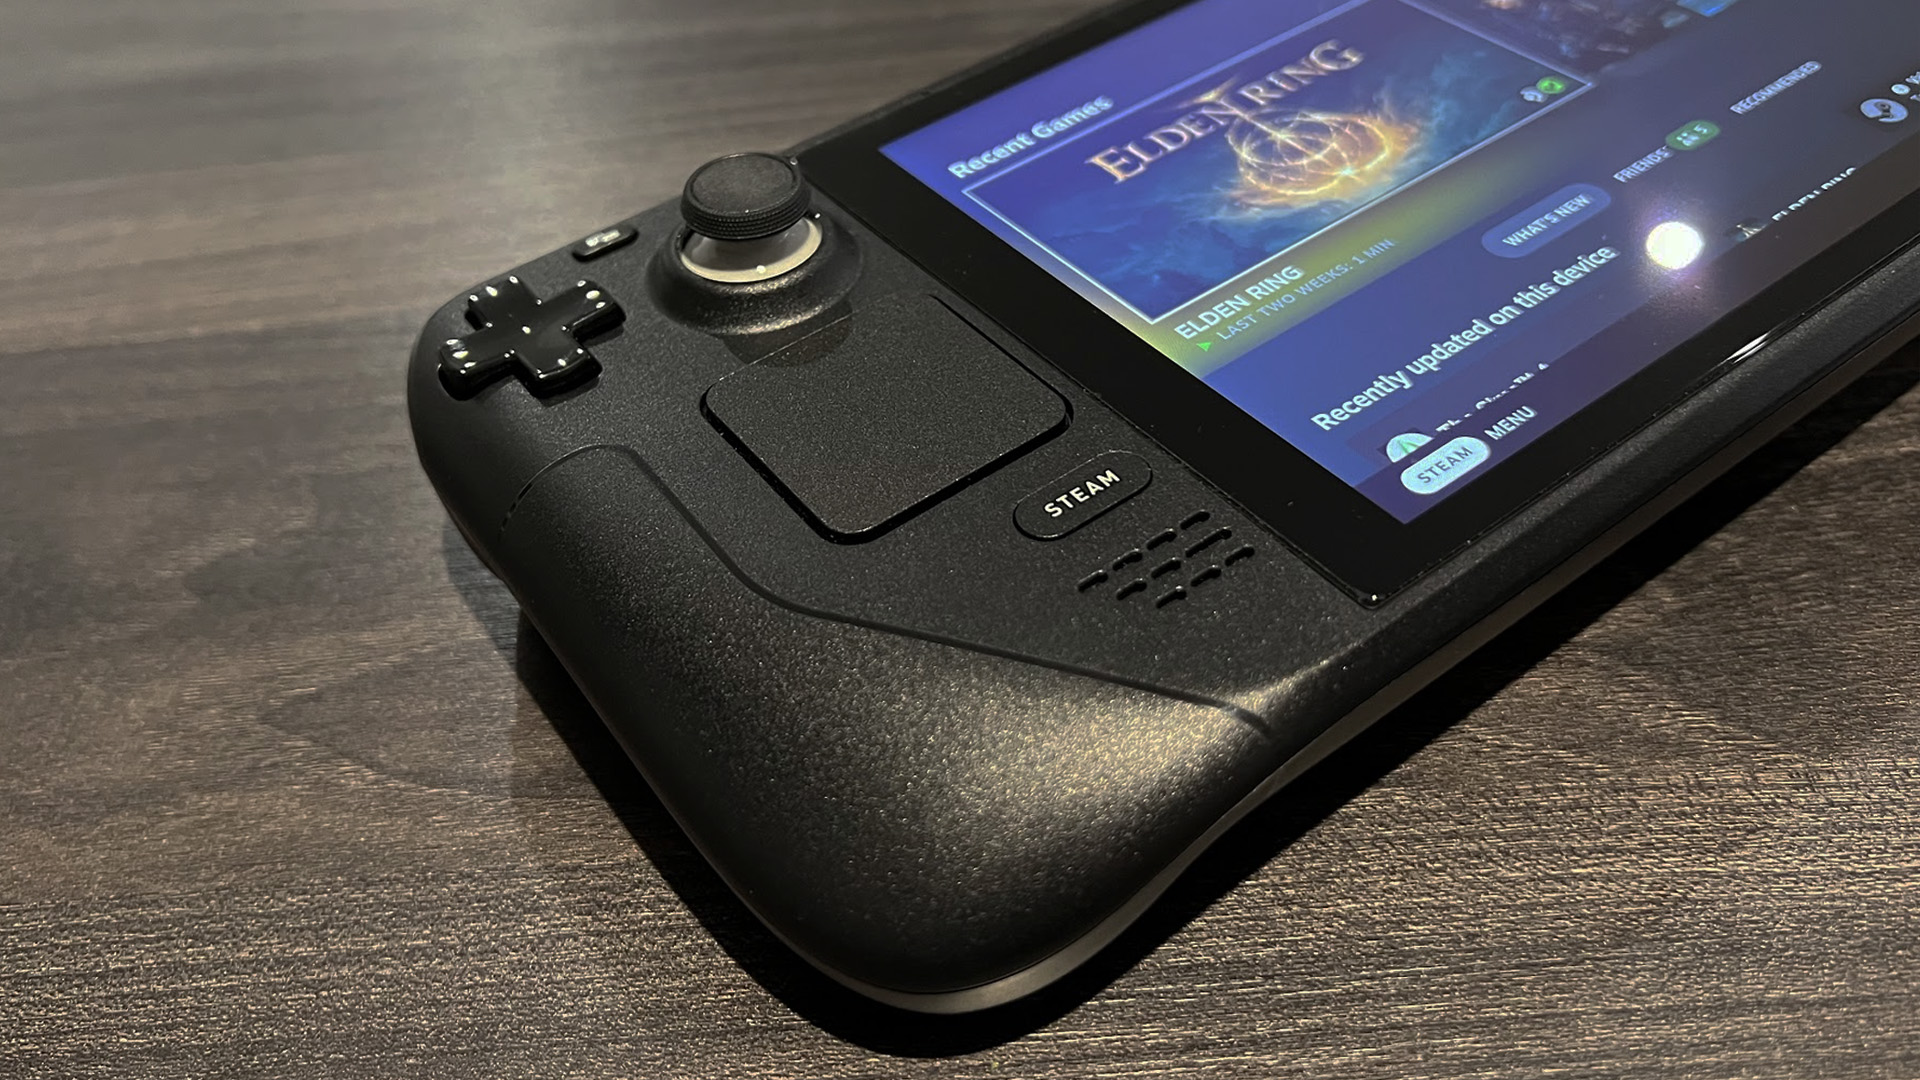 Steam Deck Review - A Portable Console For Power Users